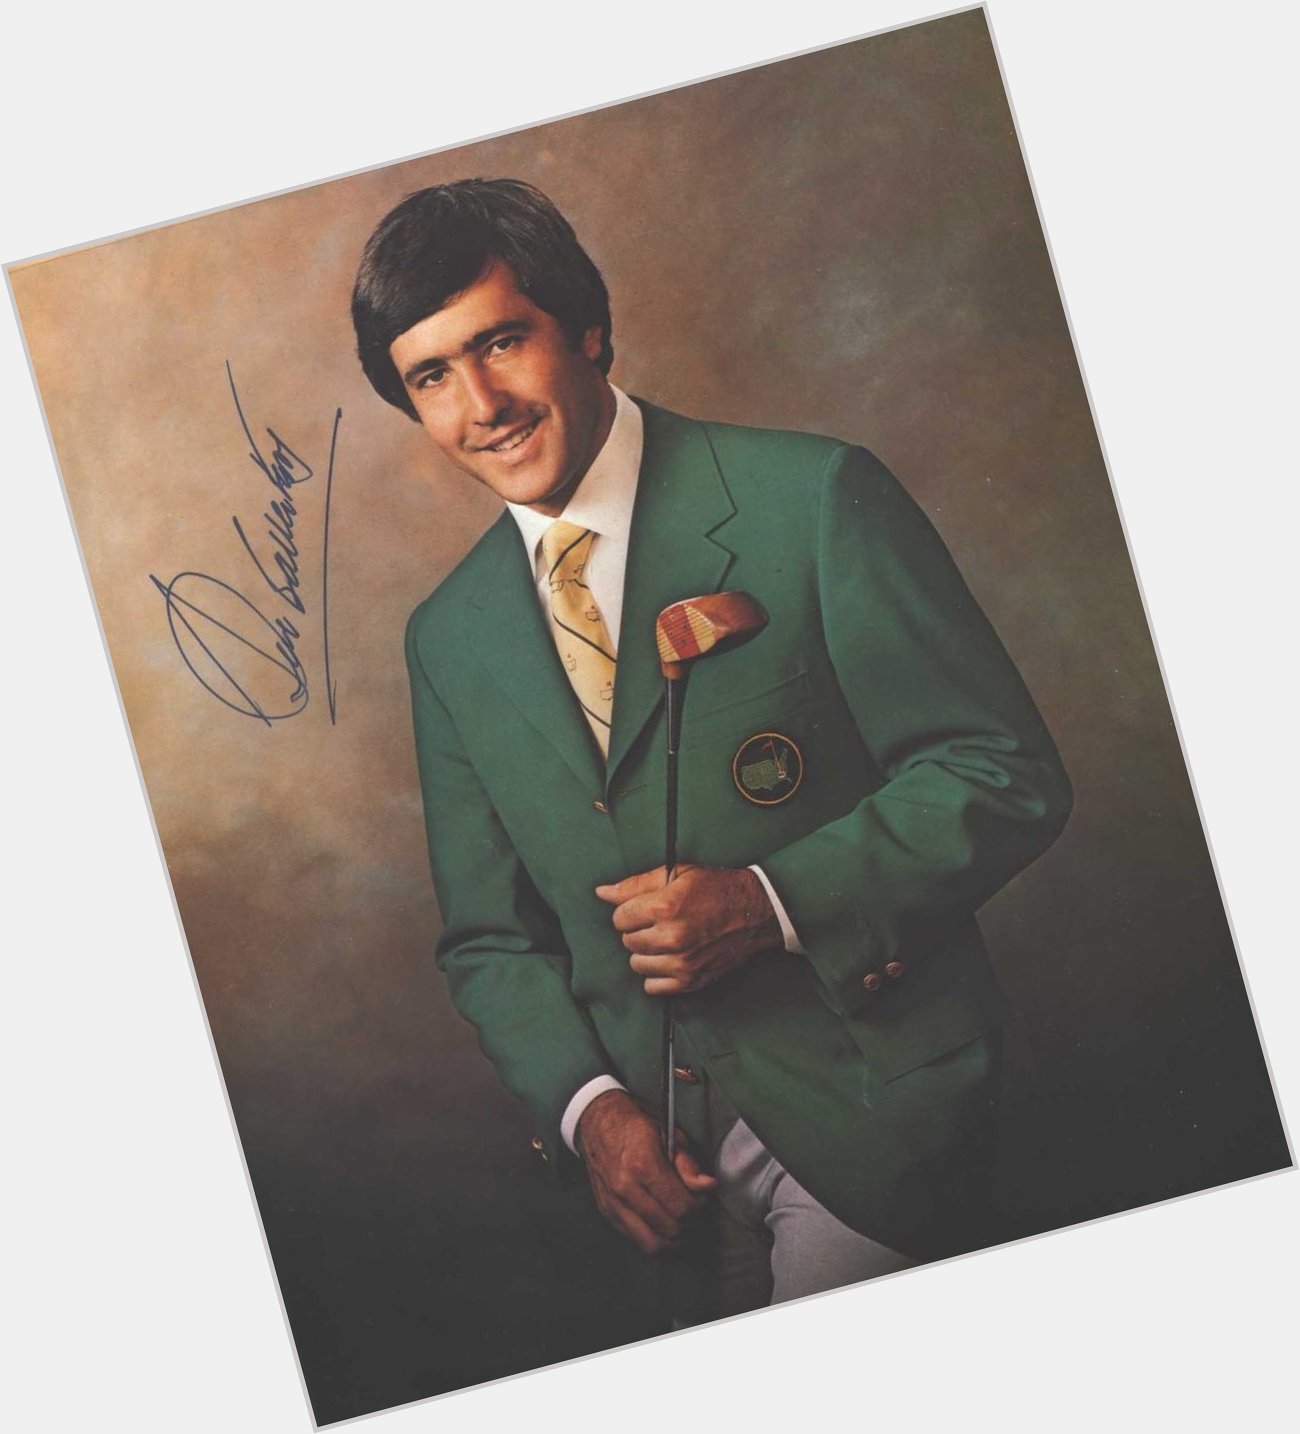 Many Happy Returns to Seve Ballesteros on what would have been his 64th birthday - 